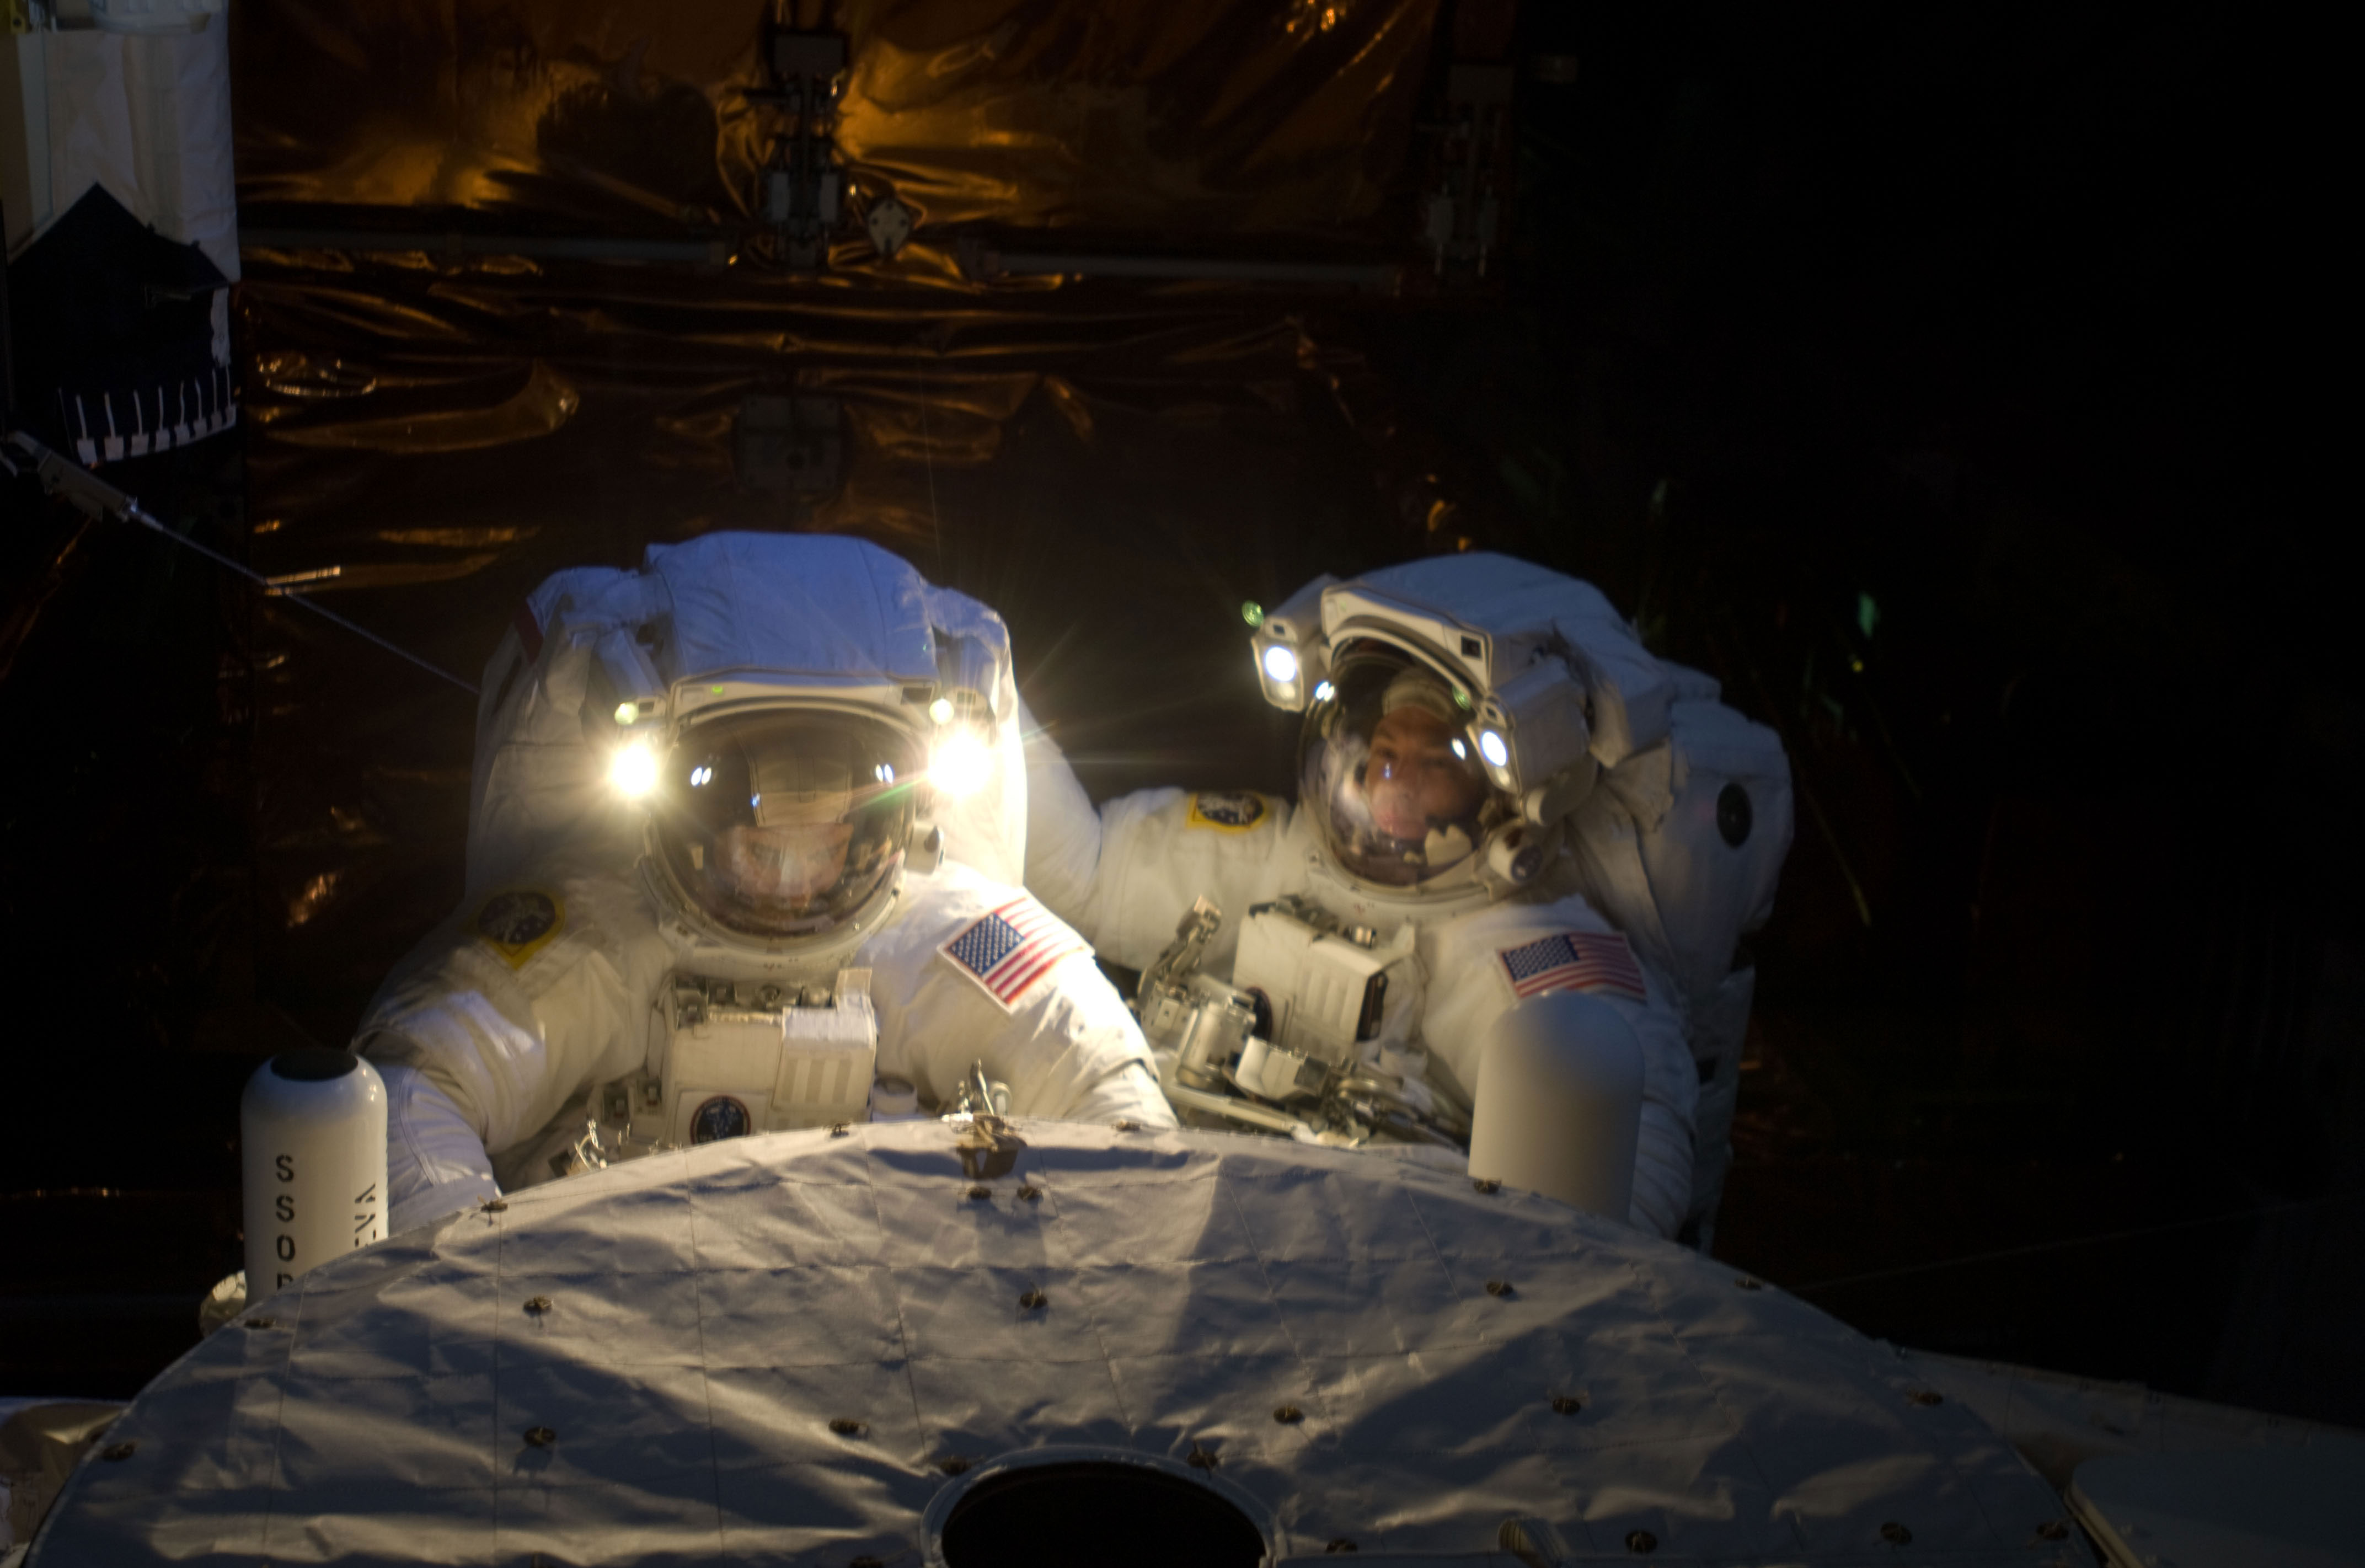 Astronauts John Grunsfeld (left) and Andrew Feustel, both STS-125 mission specialists, participate in the mission’s fifth and final ever session of extravehicular activity (EVA) to repair and upgrade the Hubble Space Telescope. During the seven-hour and two-minute spacewalk, Grunsfeld and Feustel installed a battery group replacement, removed and replaced a Fine Guidance Sensor and three thermal blankets (NOBL) protecting Hubble’s electronics. Credit: NASA